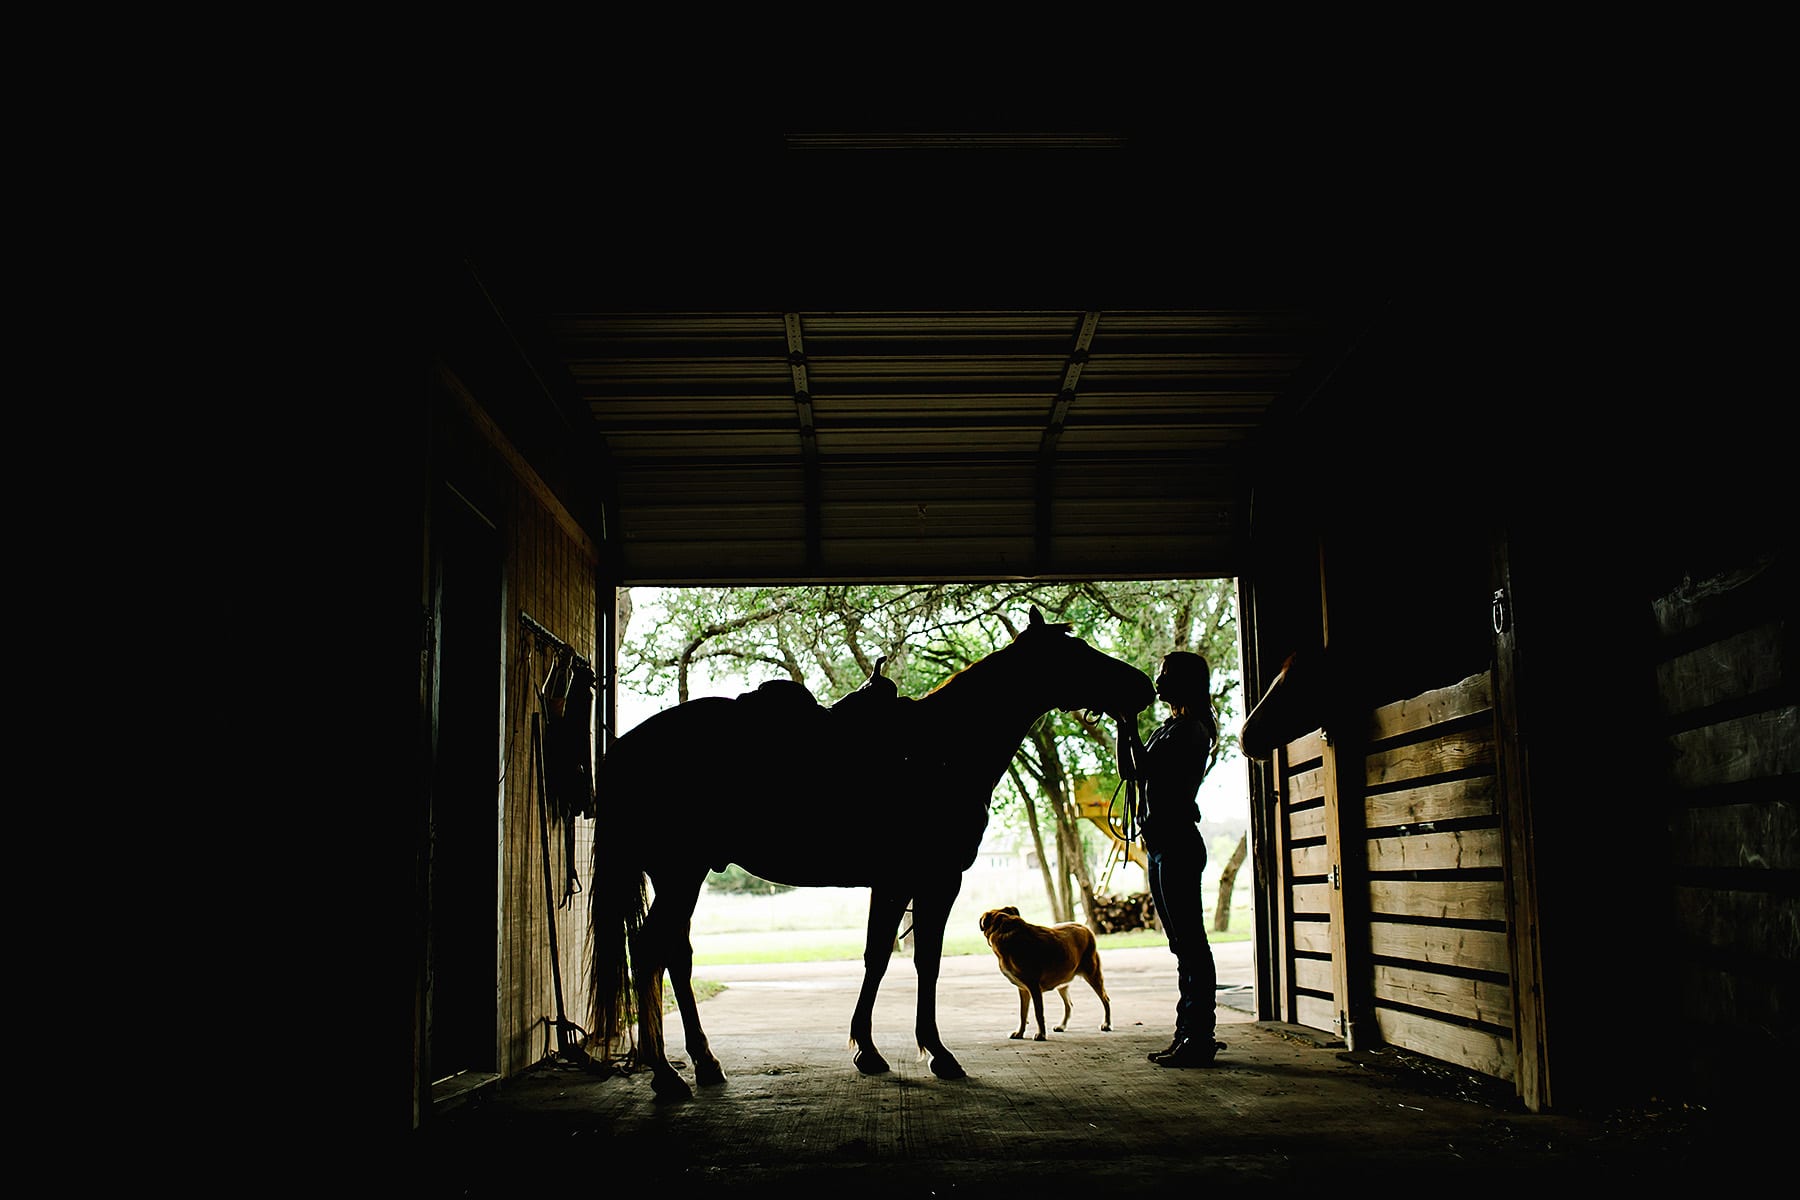 Silhouette of a Quarter horse in Driftwood, Texas